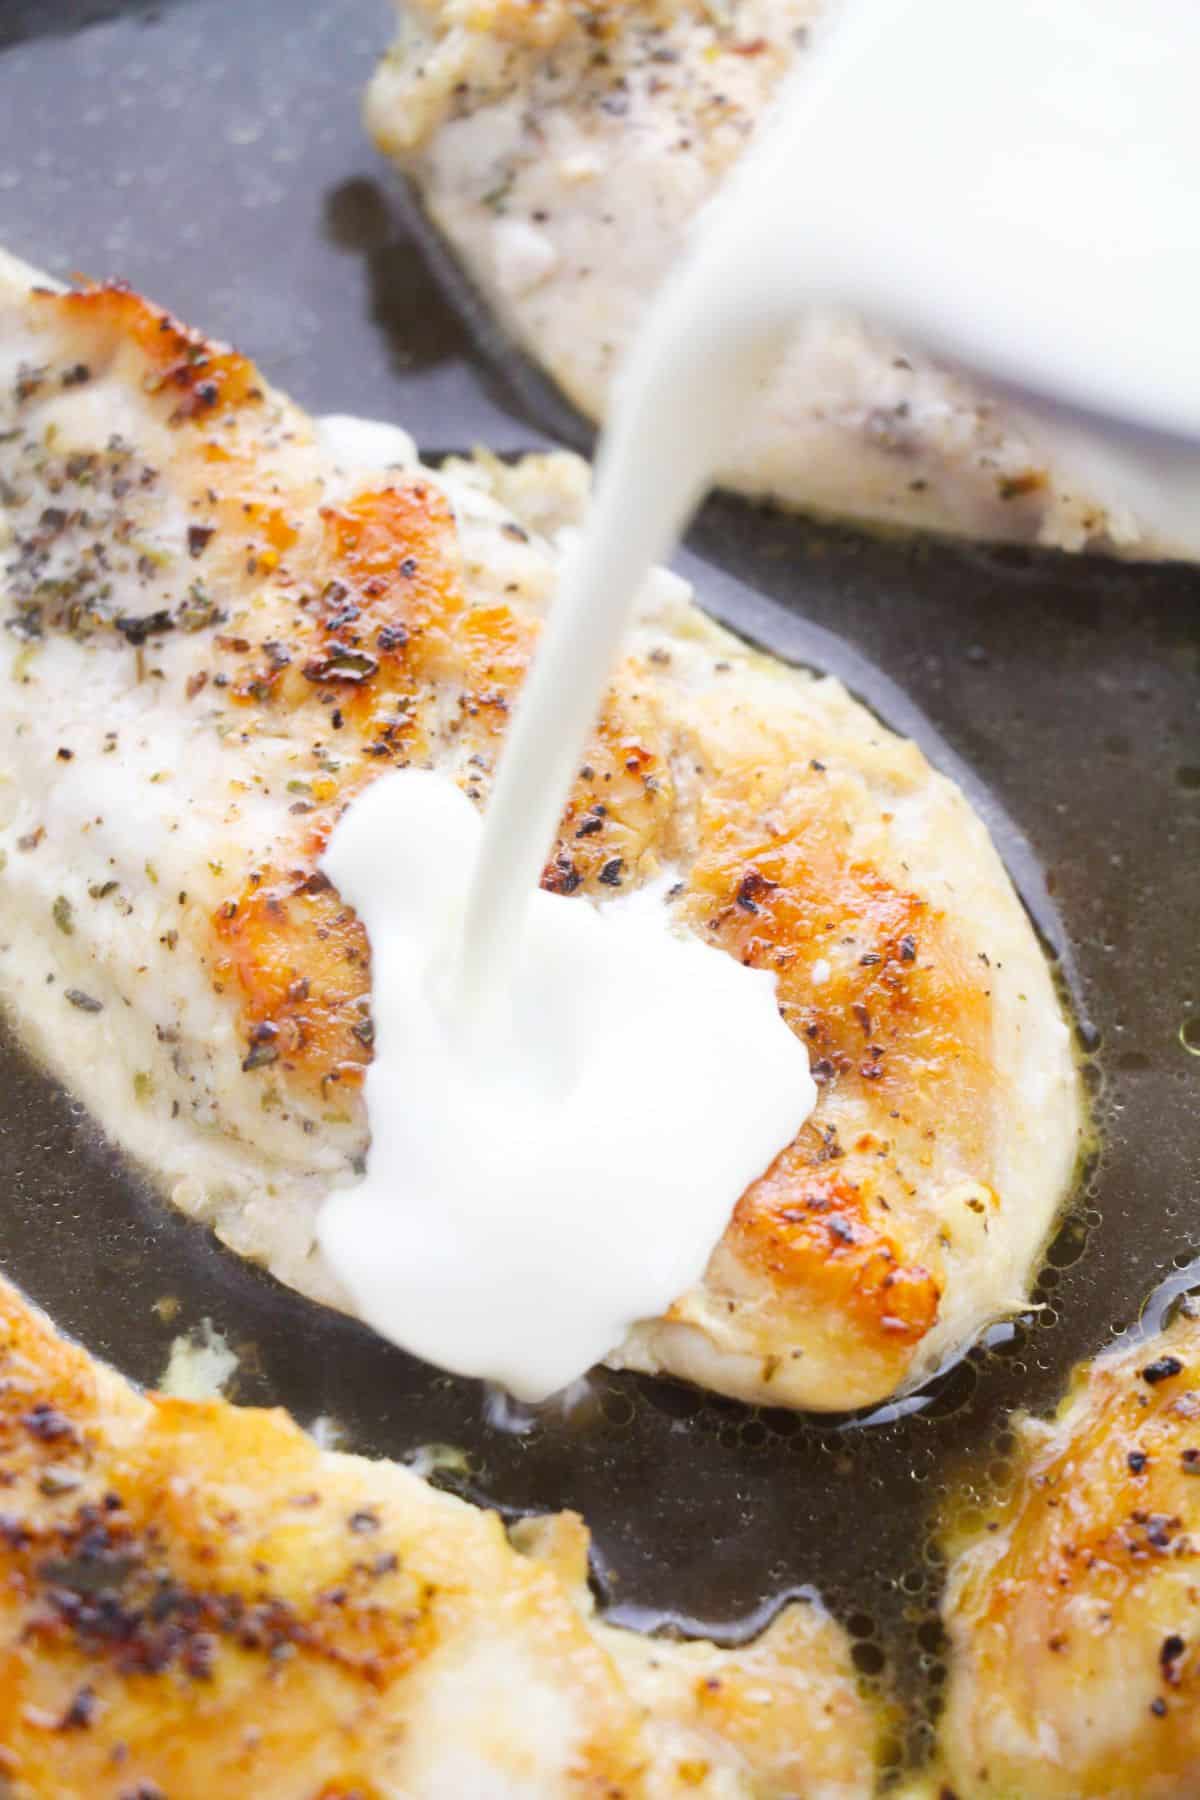 Heavy whipping cream is added to the chicken breasts cooking in a skillet.